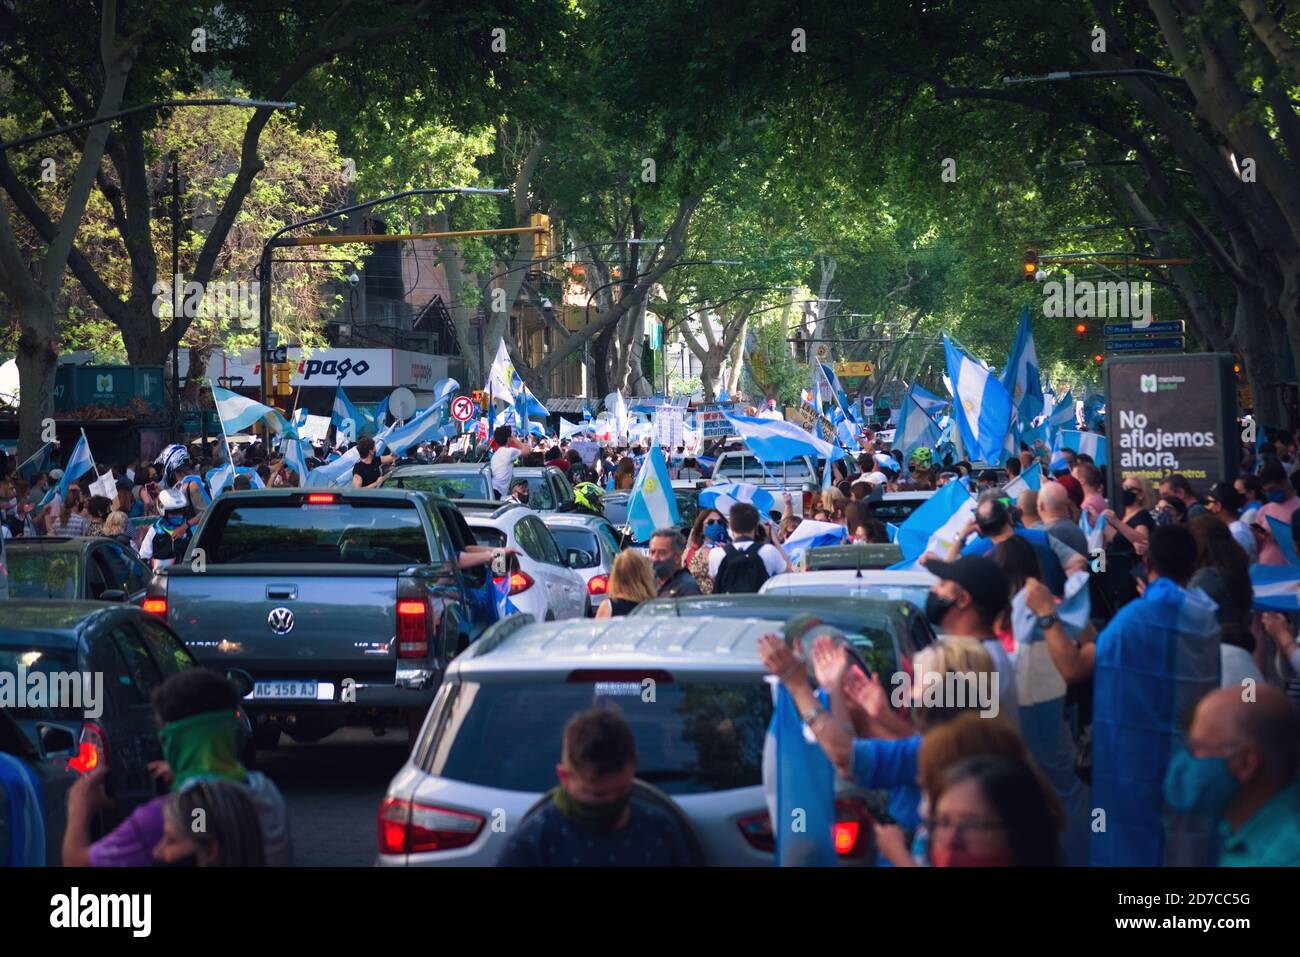 2020-10-12, Mendoza, Argentina: Crowd protesting in the streets against the economic and political measures of president Alberto Fernandez. Stock Photo